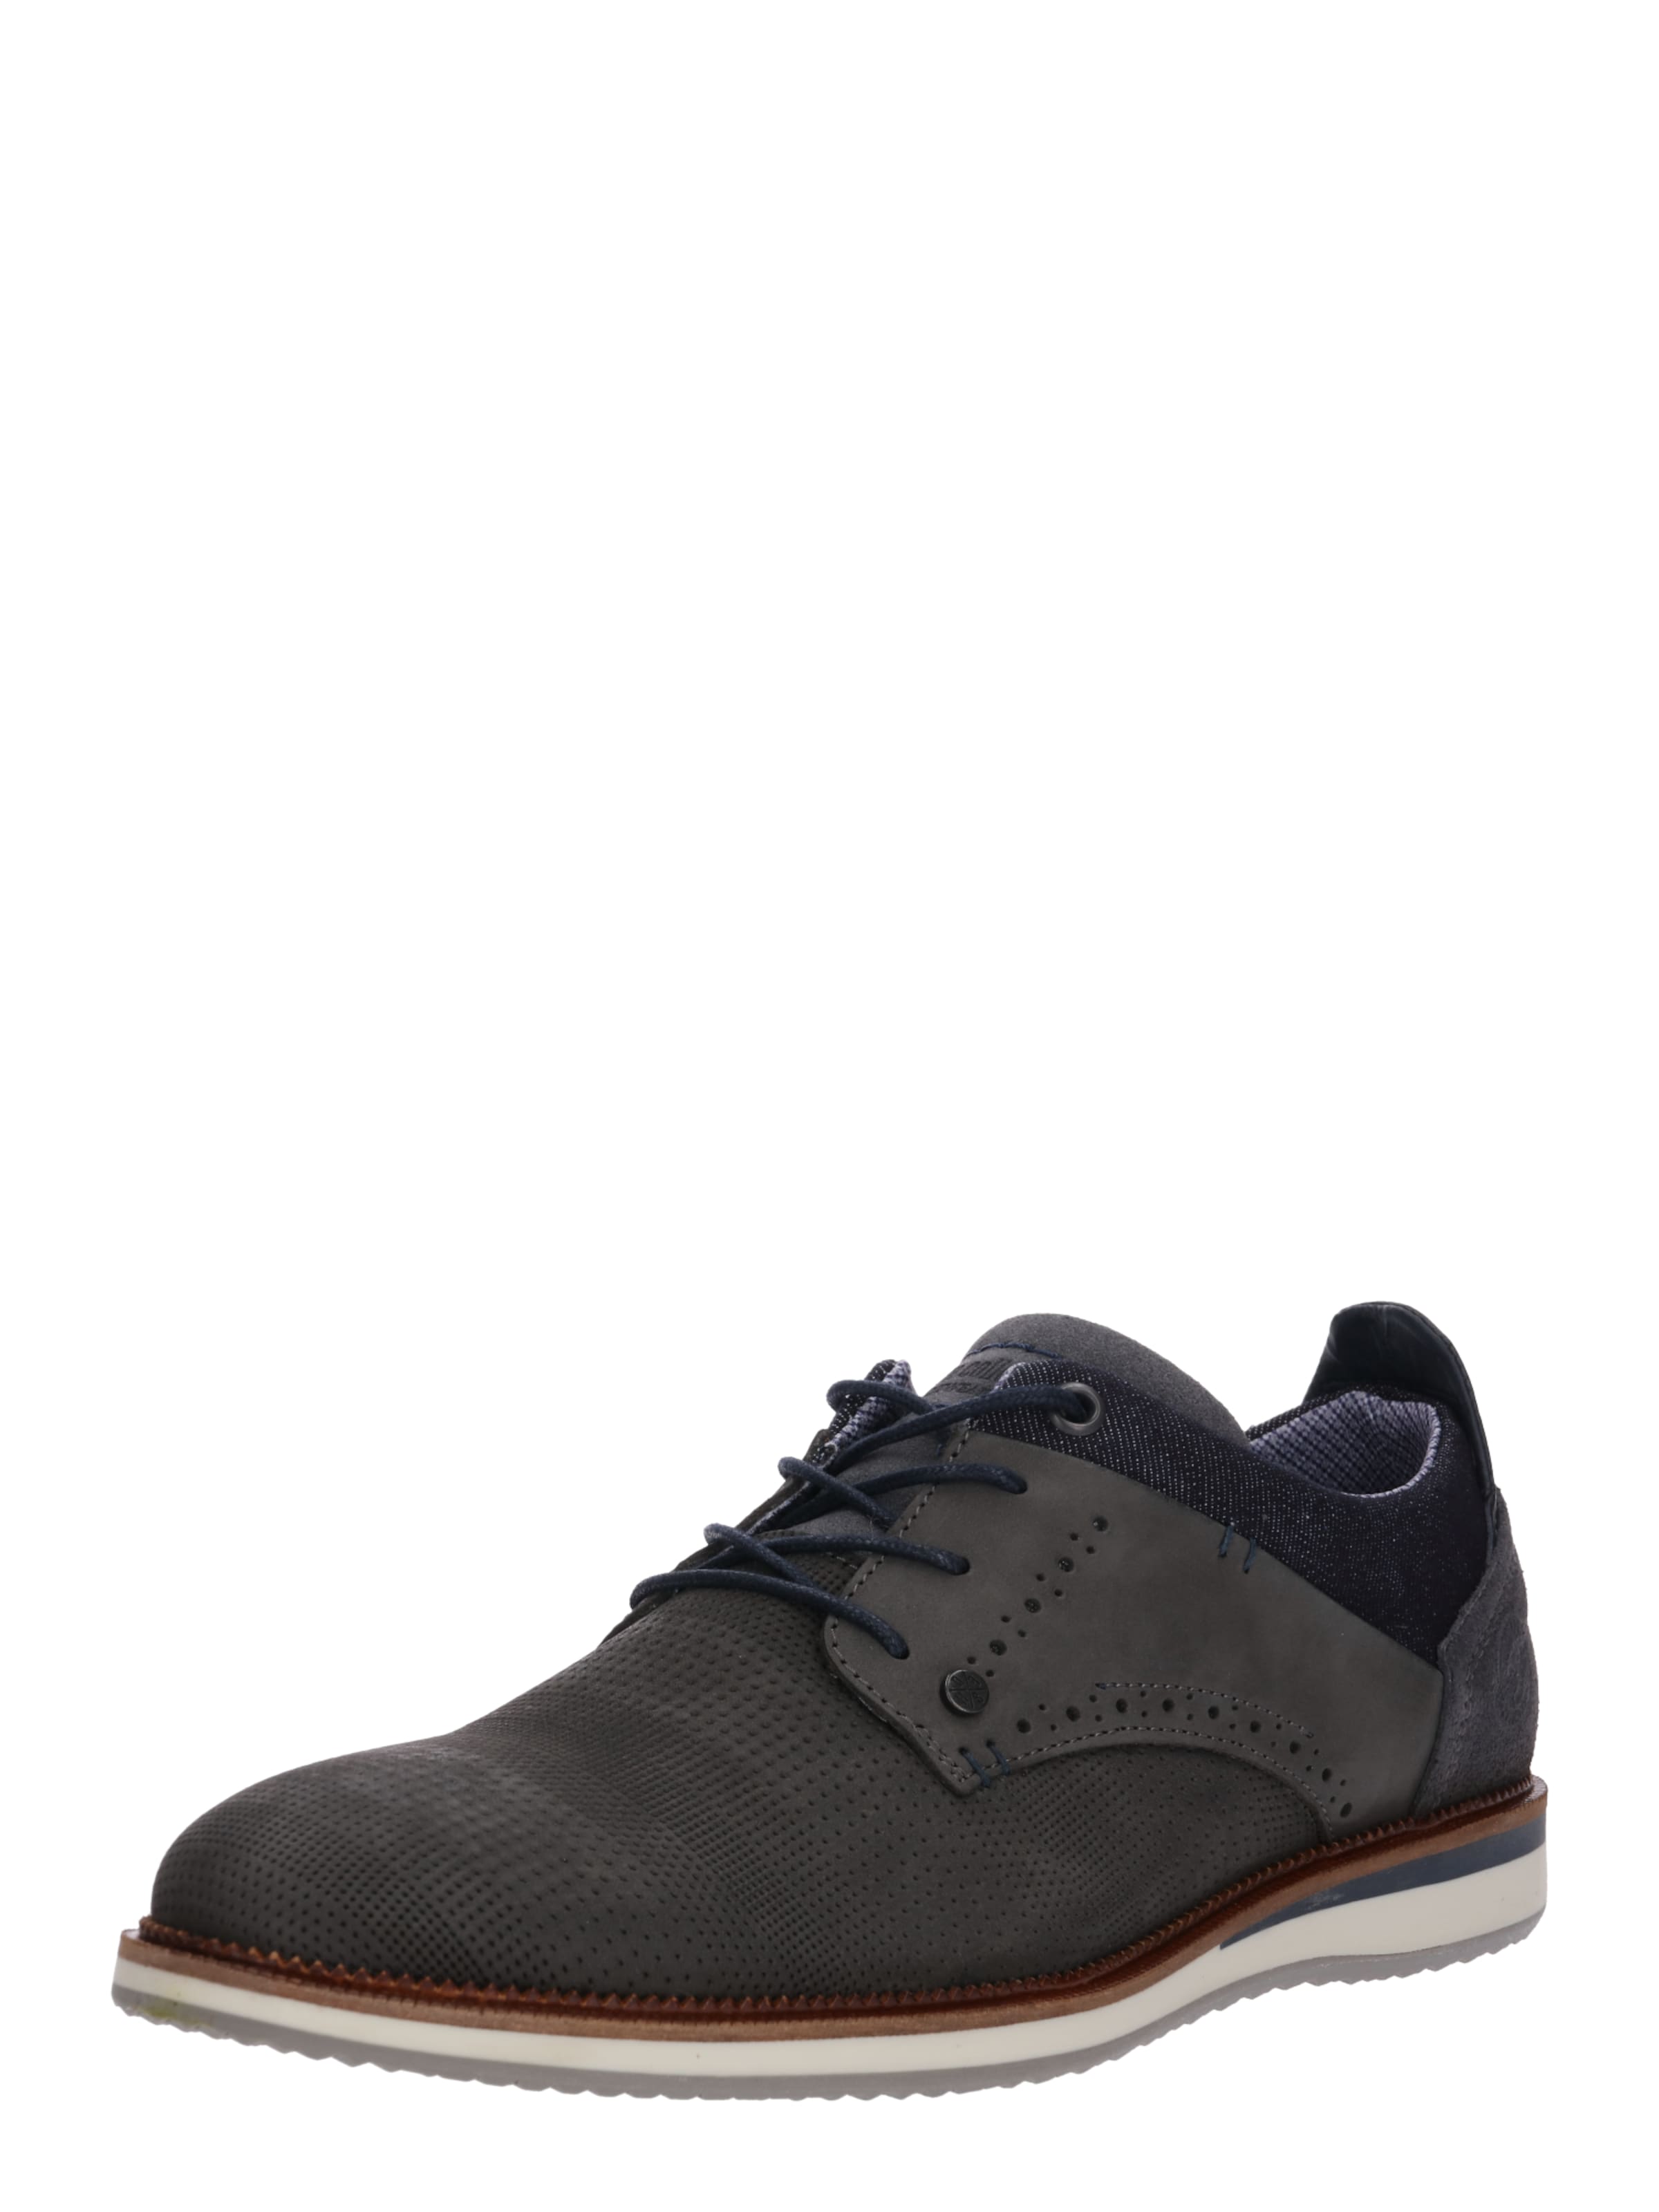 Men Low shoes | BULLBOXER Lace-Up Shoes in Anthracite - QZ90936